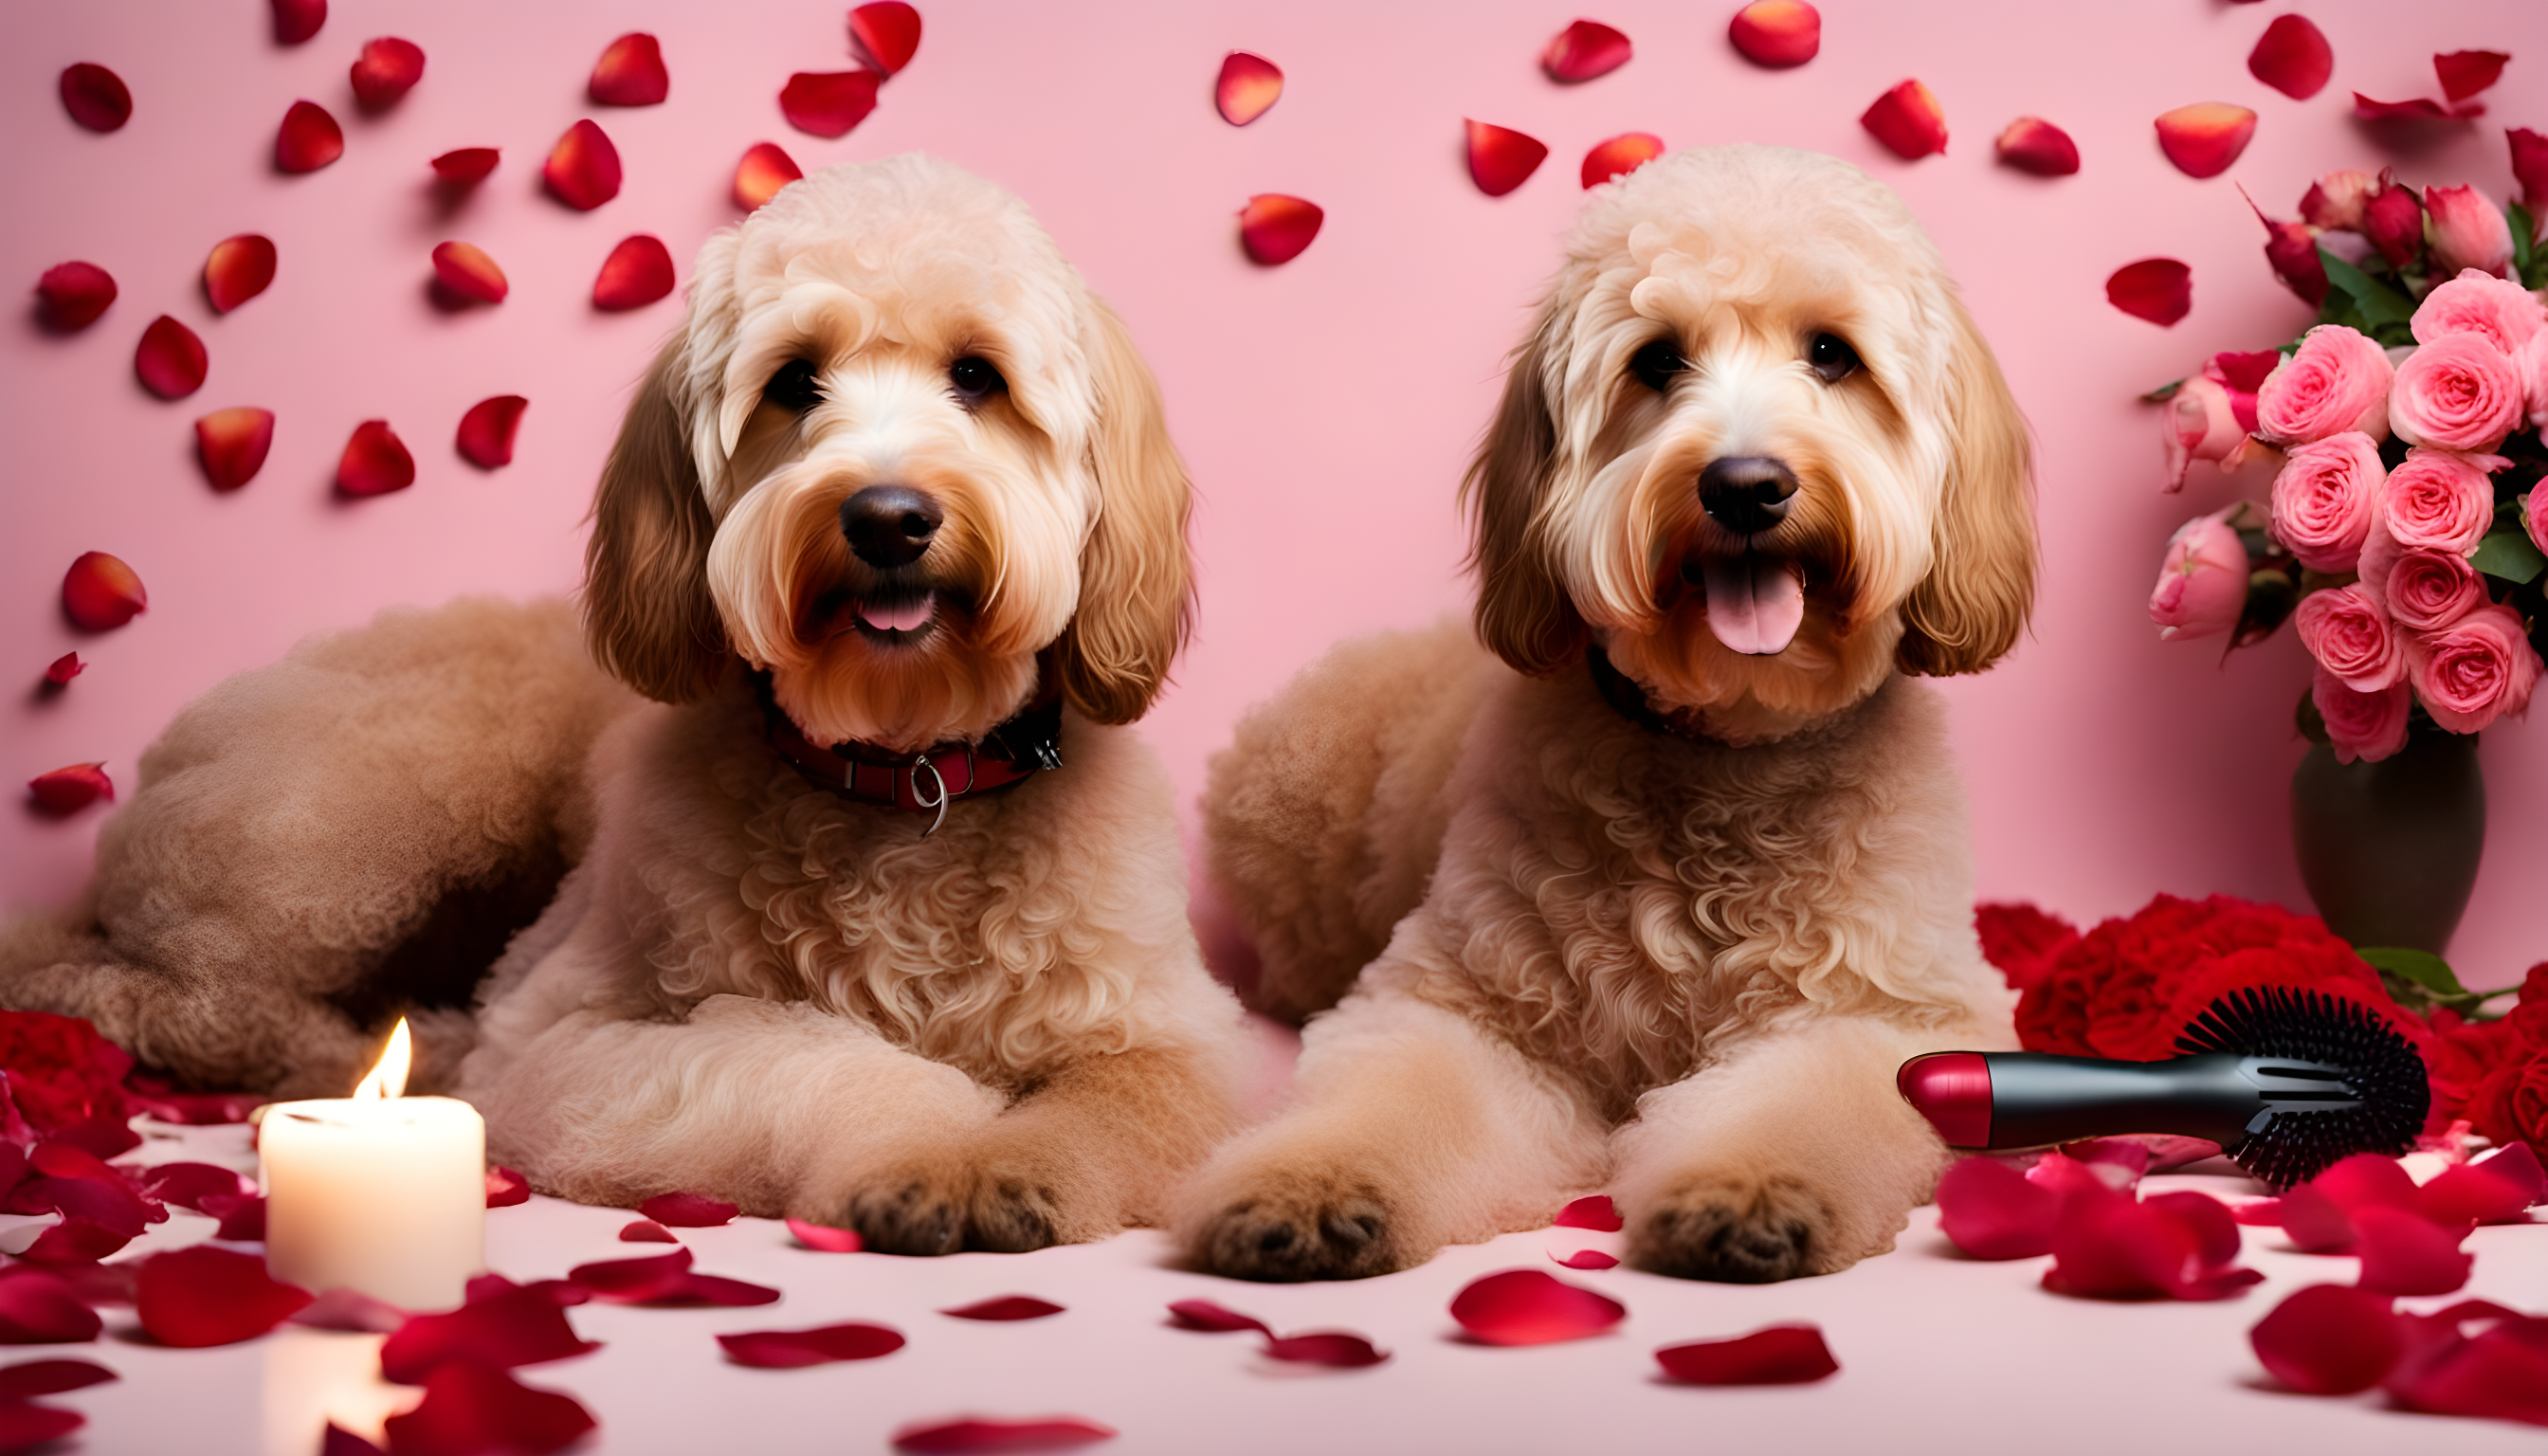 A Labradoodle surrounded by rose petals, spa candles, and a grooming brush.